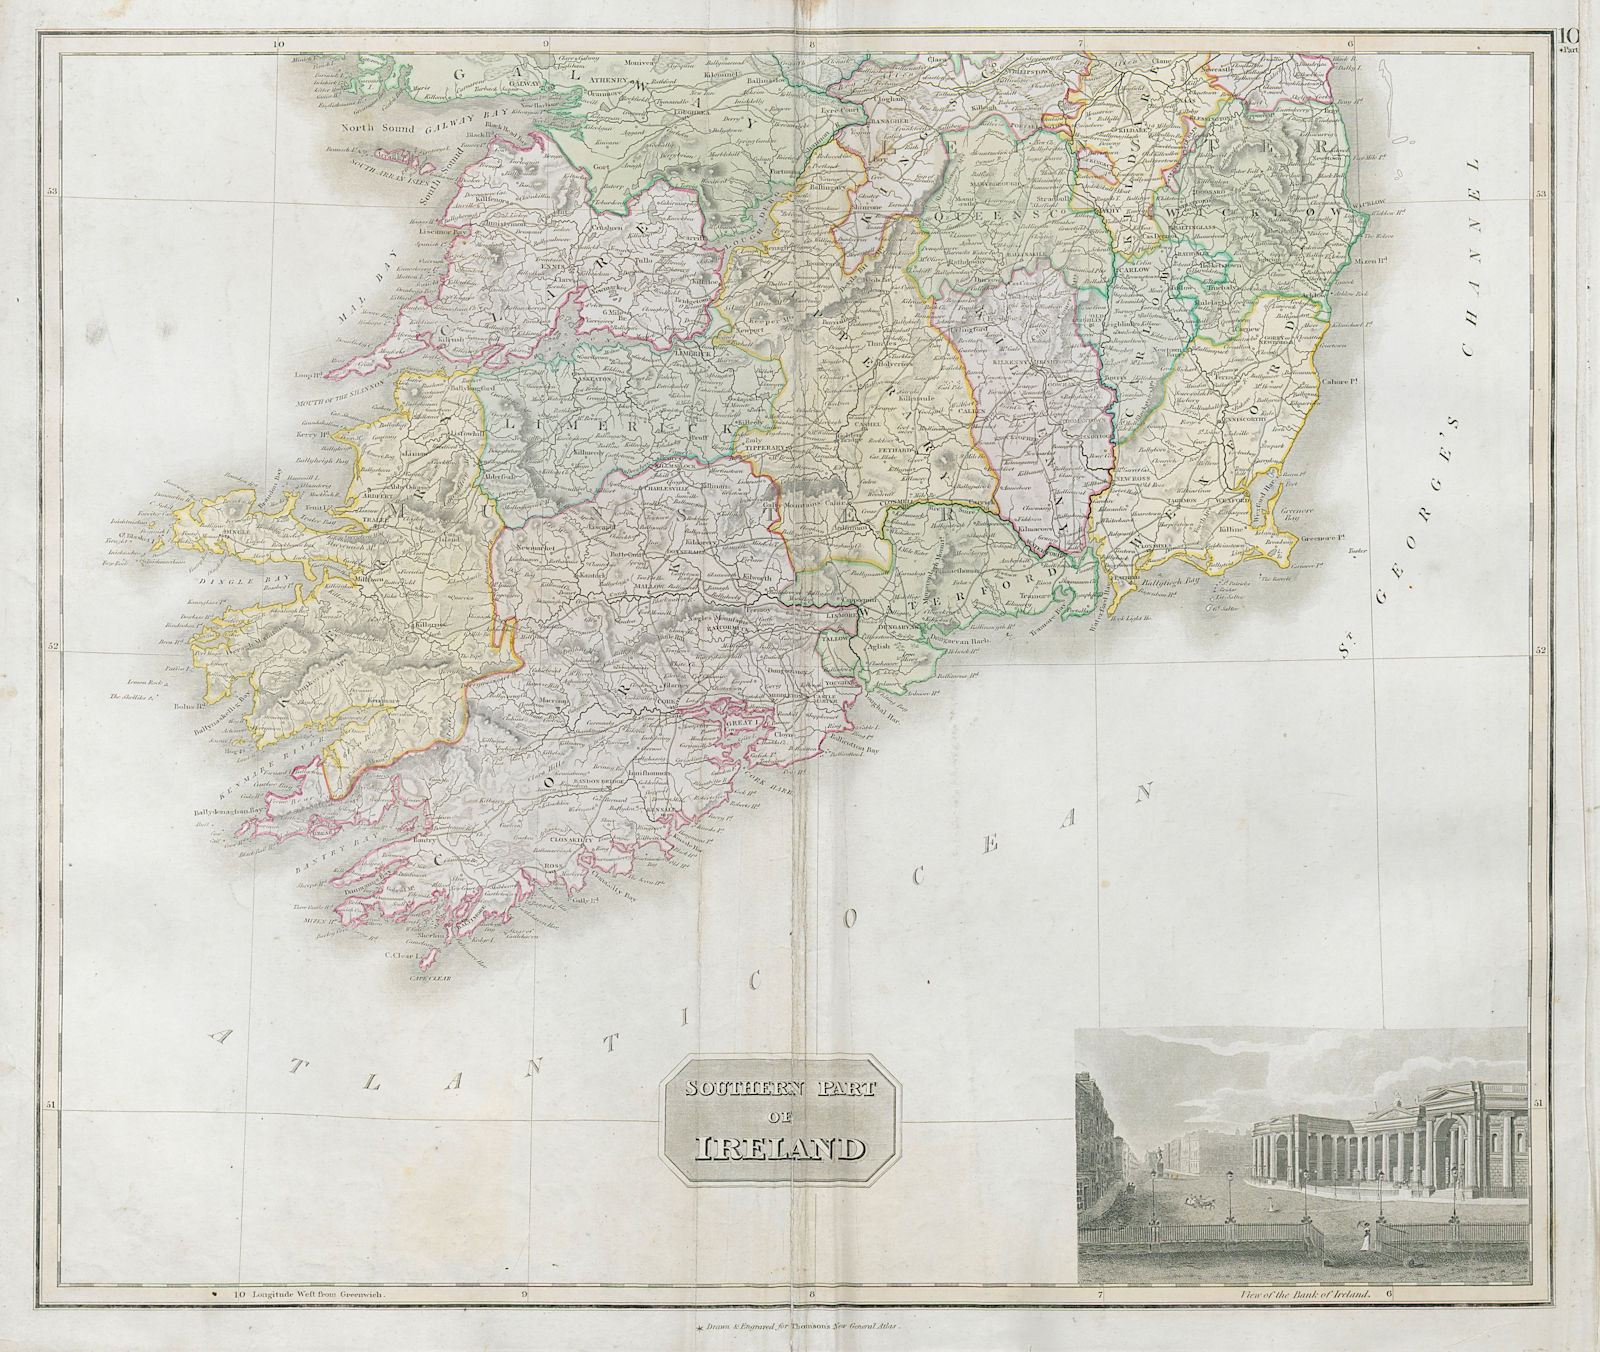 Southern part of Ireland. Munster Leinster. Coach roads. THOMSON 1830 old map